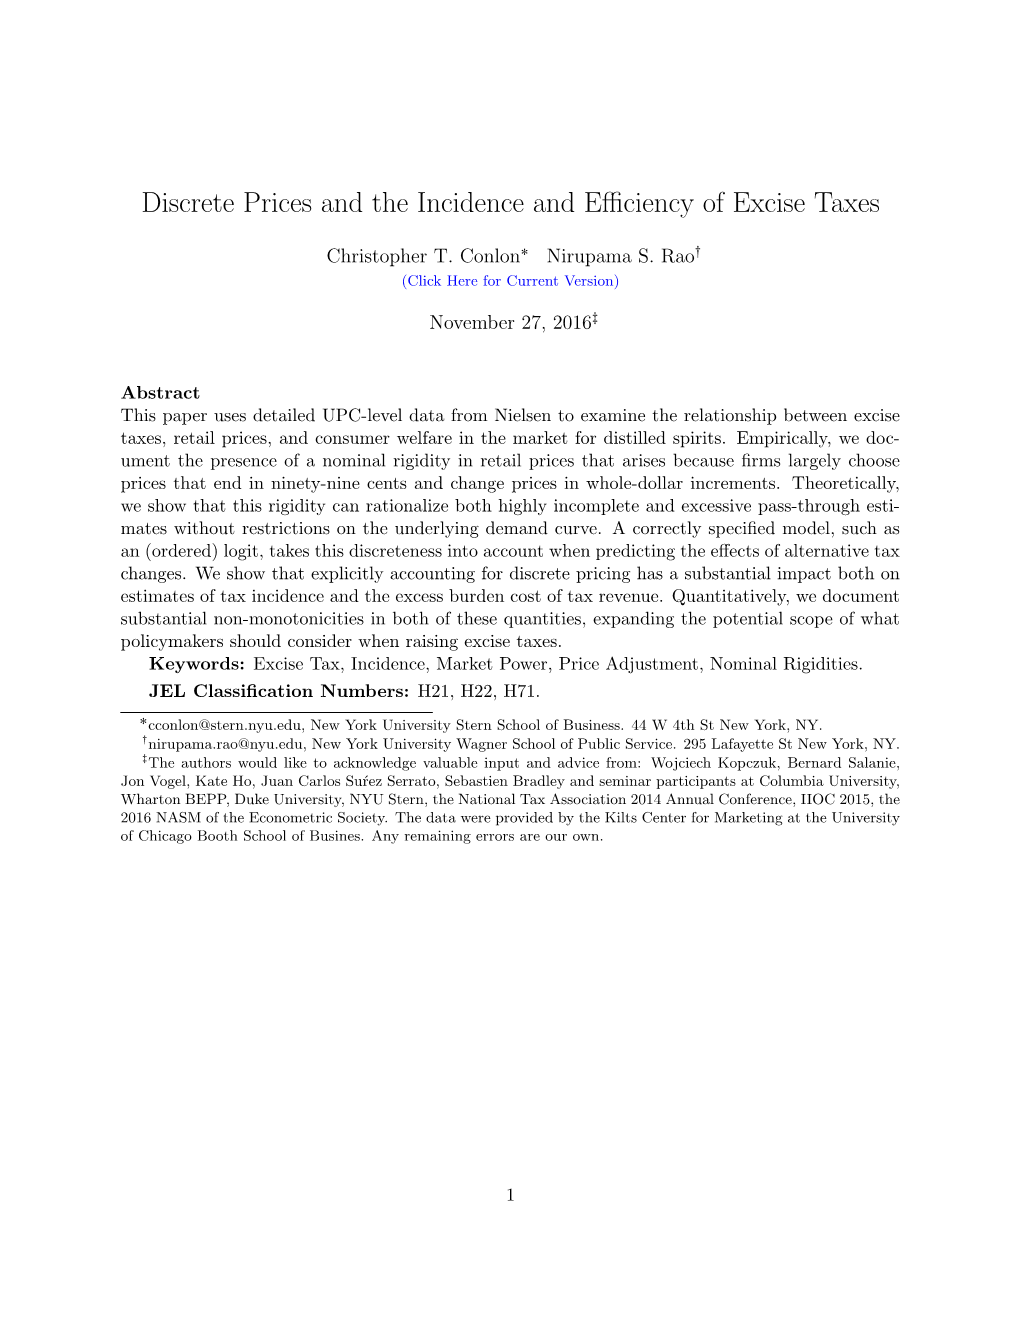 Discrete Prices and the Incidence and Efficiency of Excise Taxes